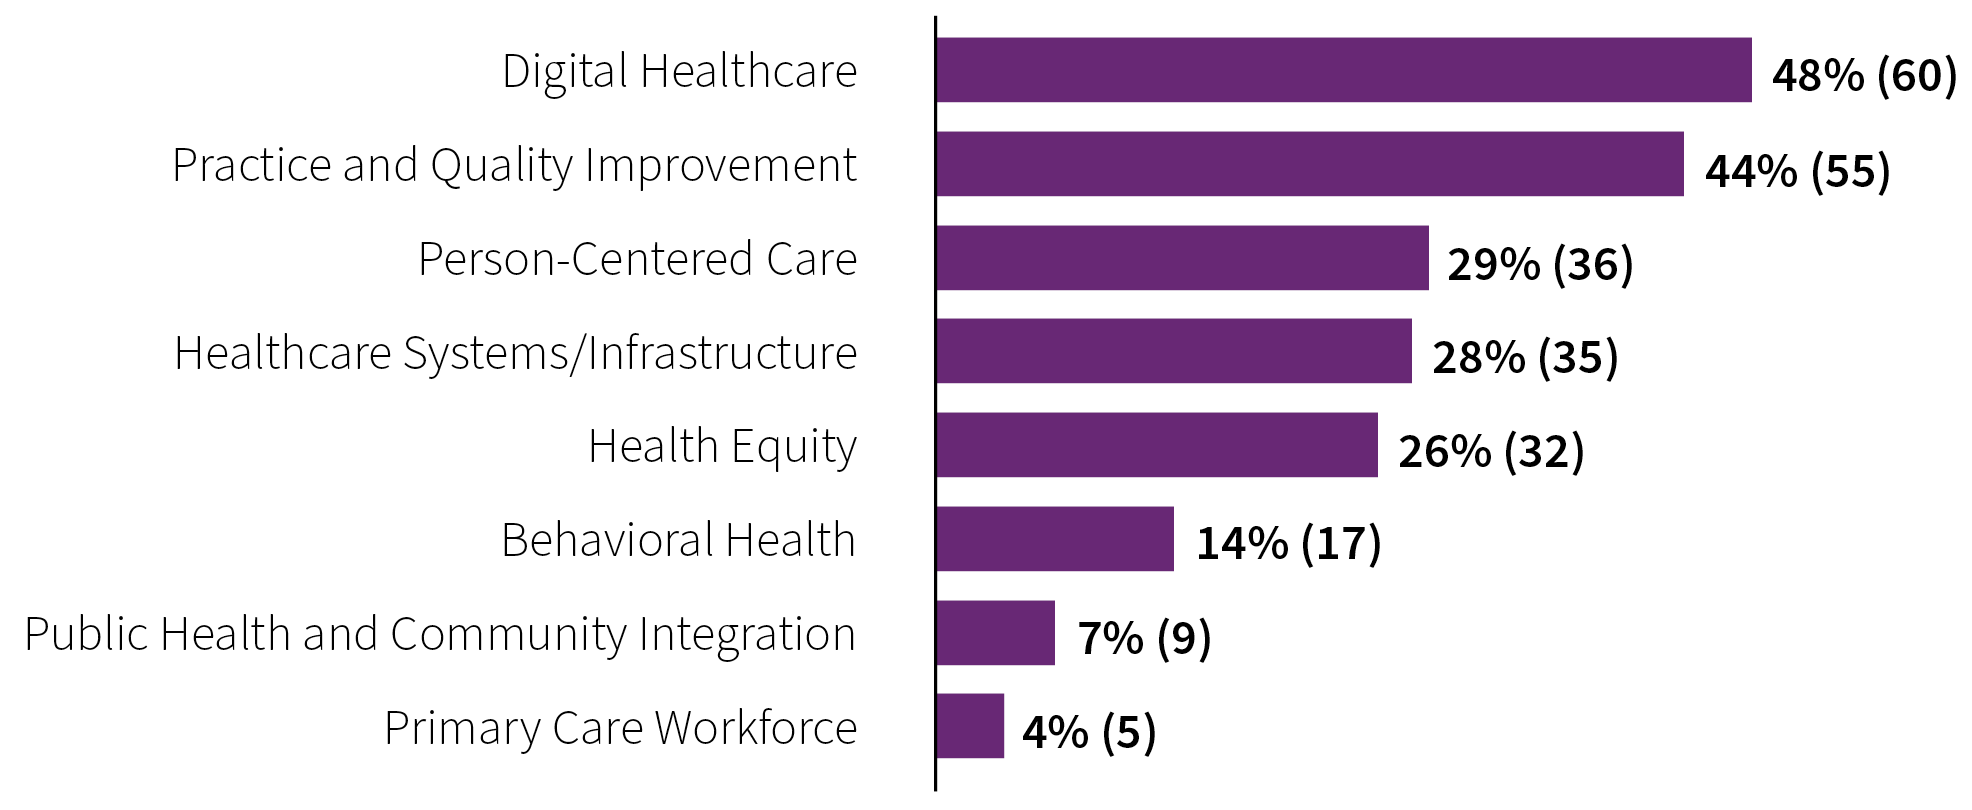 This bar chart shows the proportion of grants by topic area when looking at the top three topic areas addressed across each grant. This includes 48% (n=60) for Digital Healthcare; 44% (n=55) for Practice and Quality Improvement; 29% (n=36) for Person-Centered Care; 28% (35) for Healthcare Systems/Infrastructure; 26% (32) for Health Equity; 14% (17) for Behavioral Health; 7% (n=9) for Public Health and Community Integration; and 4% (n=5) for Primary Care Workforce